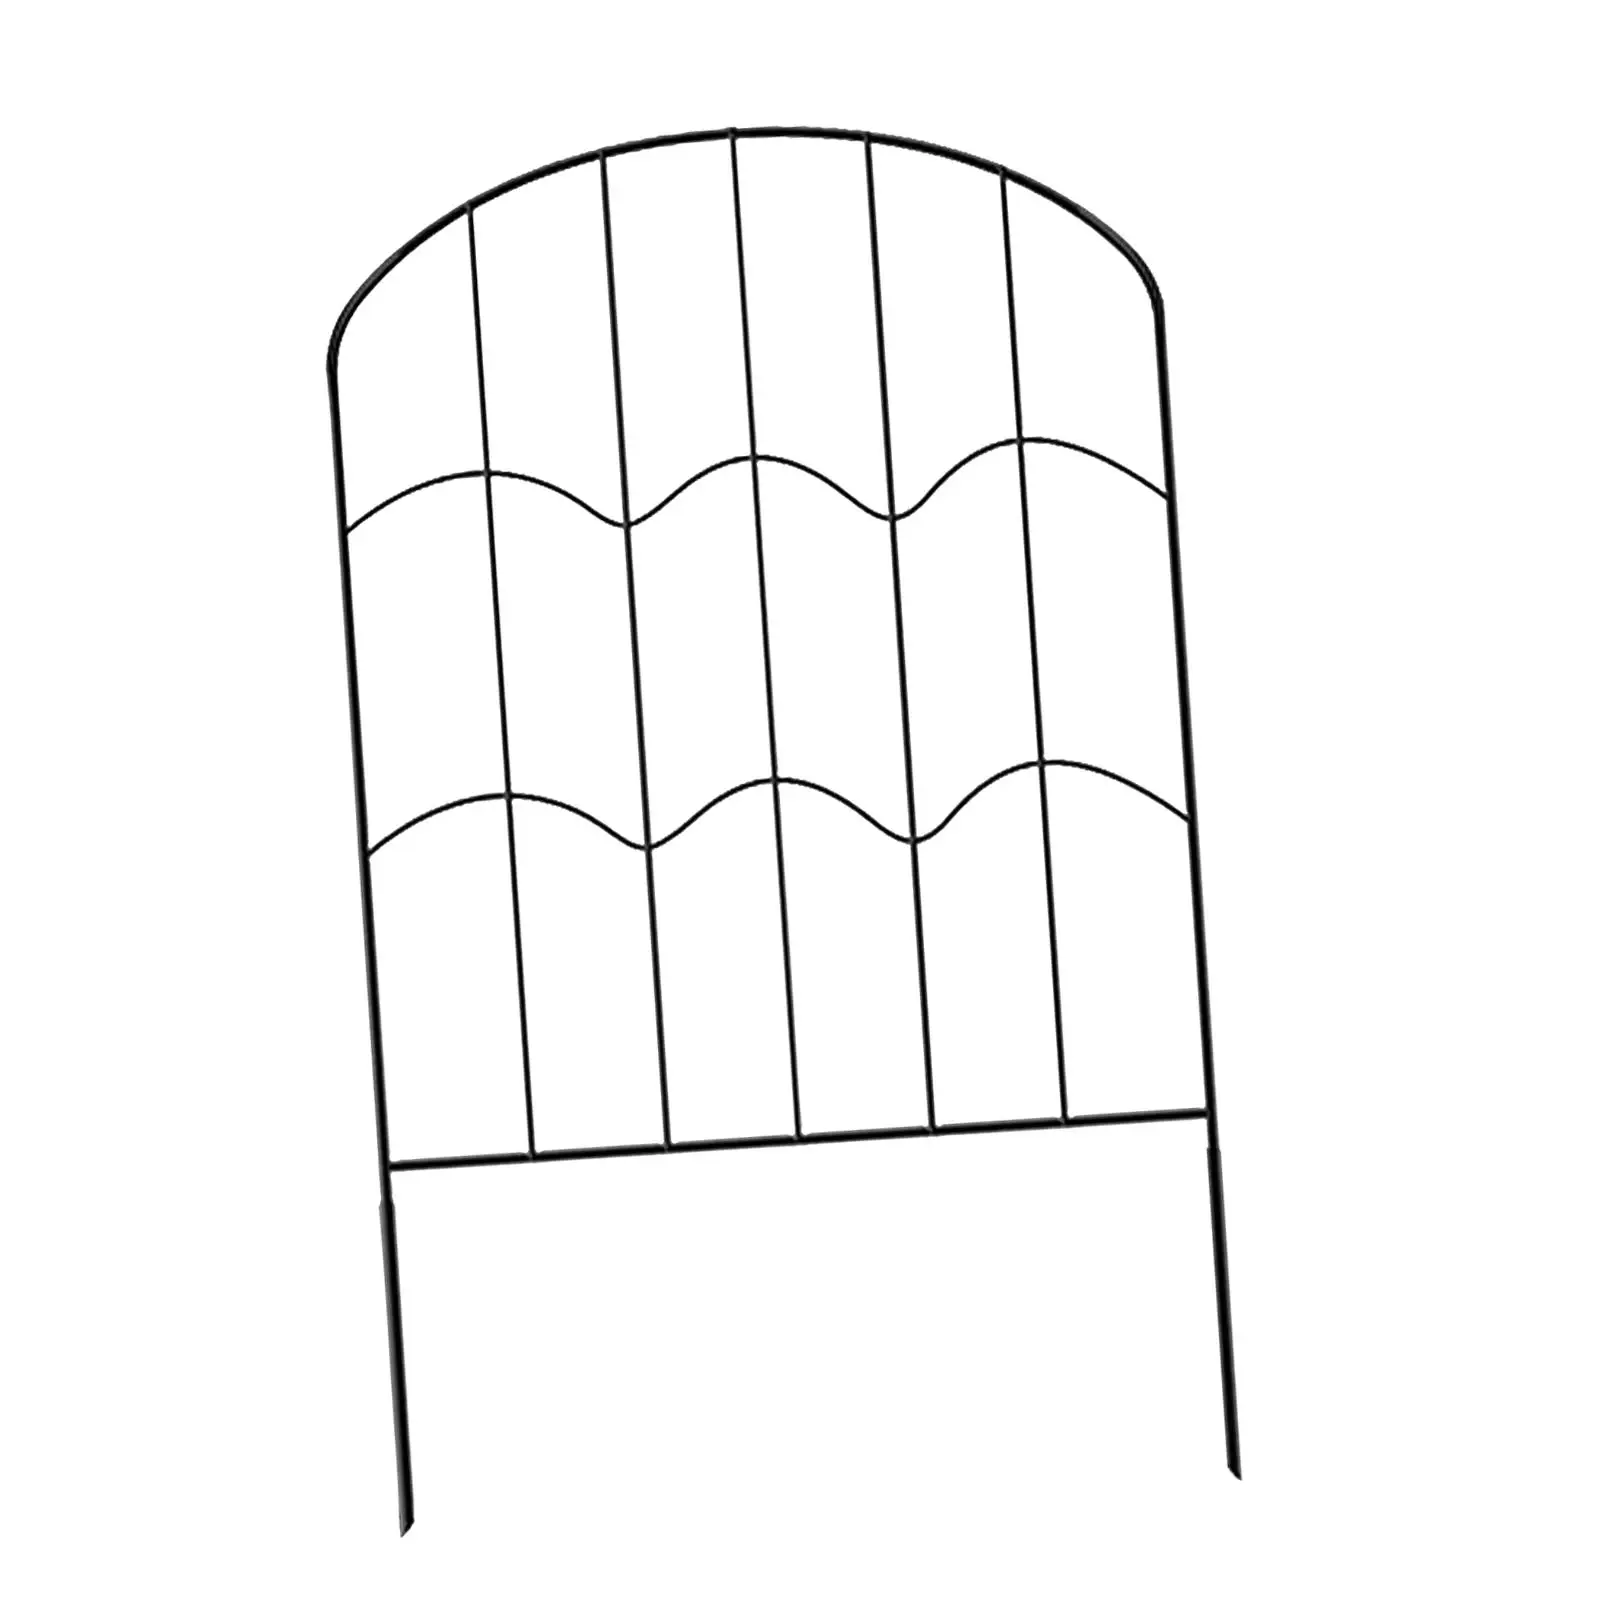 Animal Barrier Picket Edging Privacy Stairs Decorative Garden Fence Panel